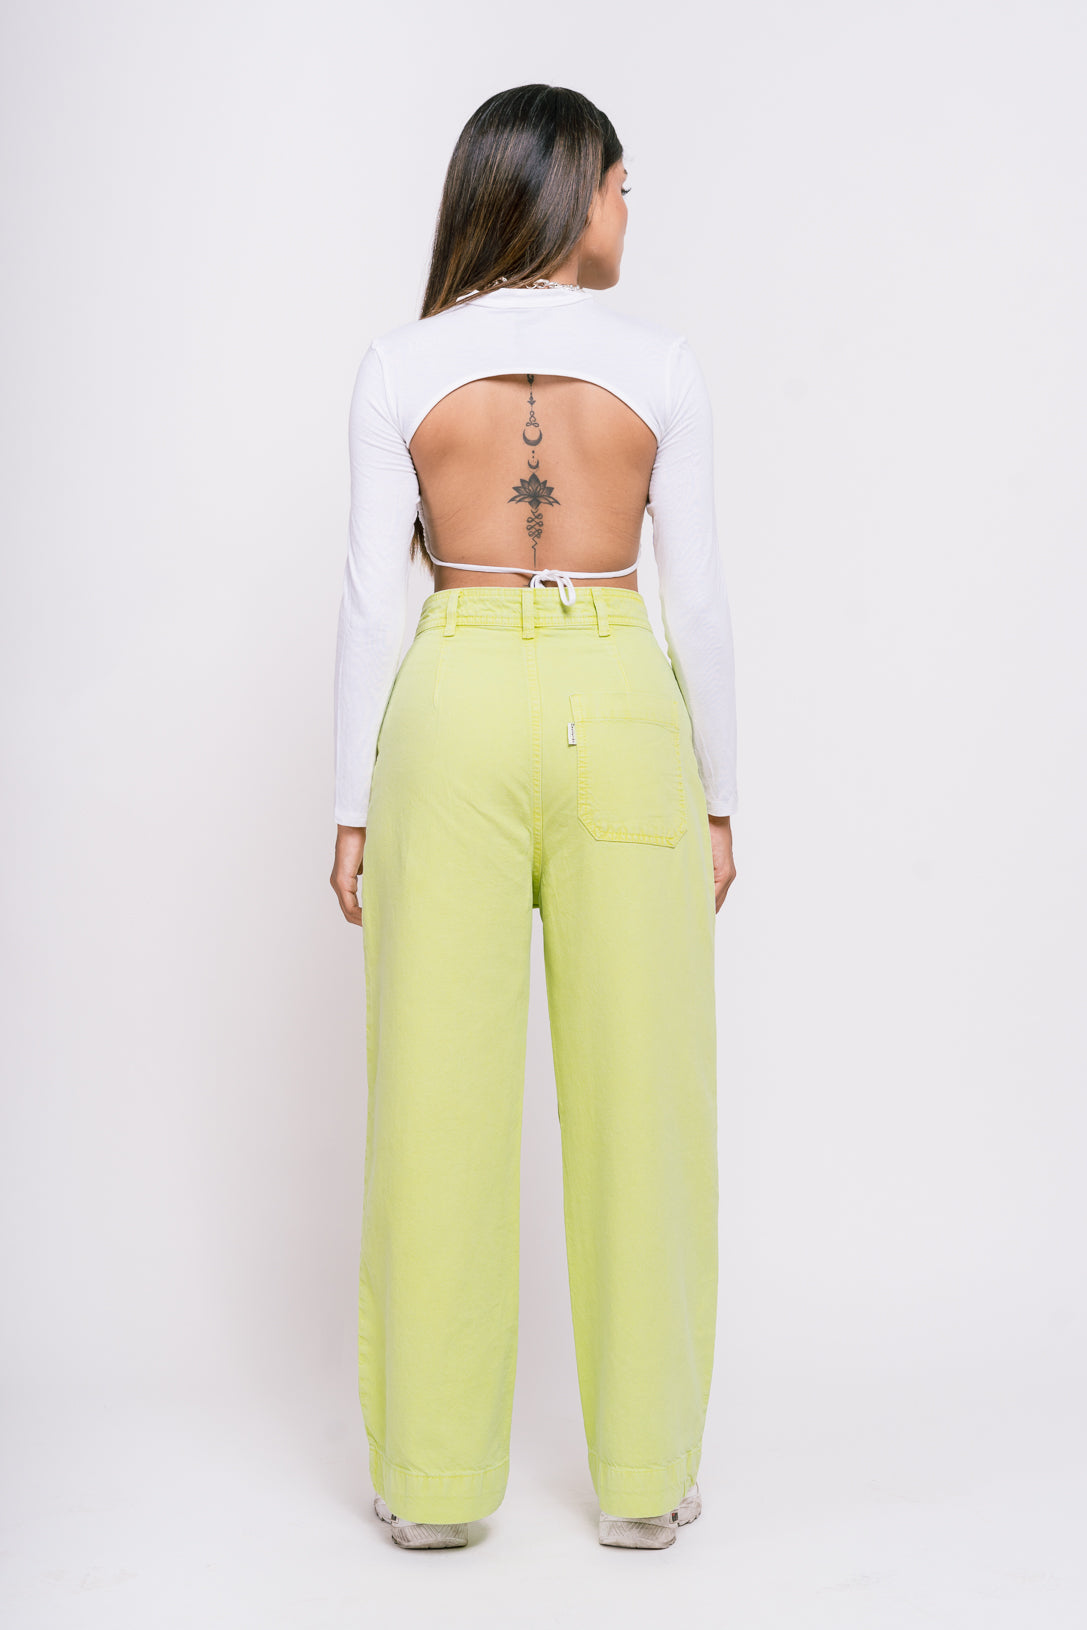 NEON GREEN STRAIGHT JEANS